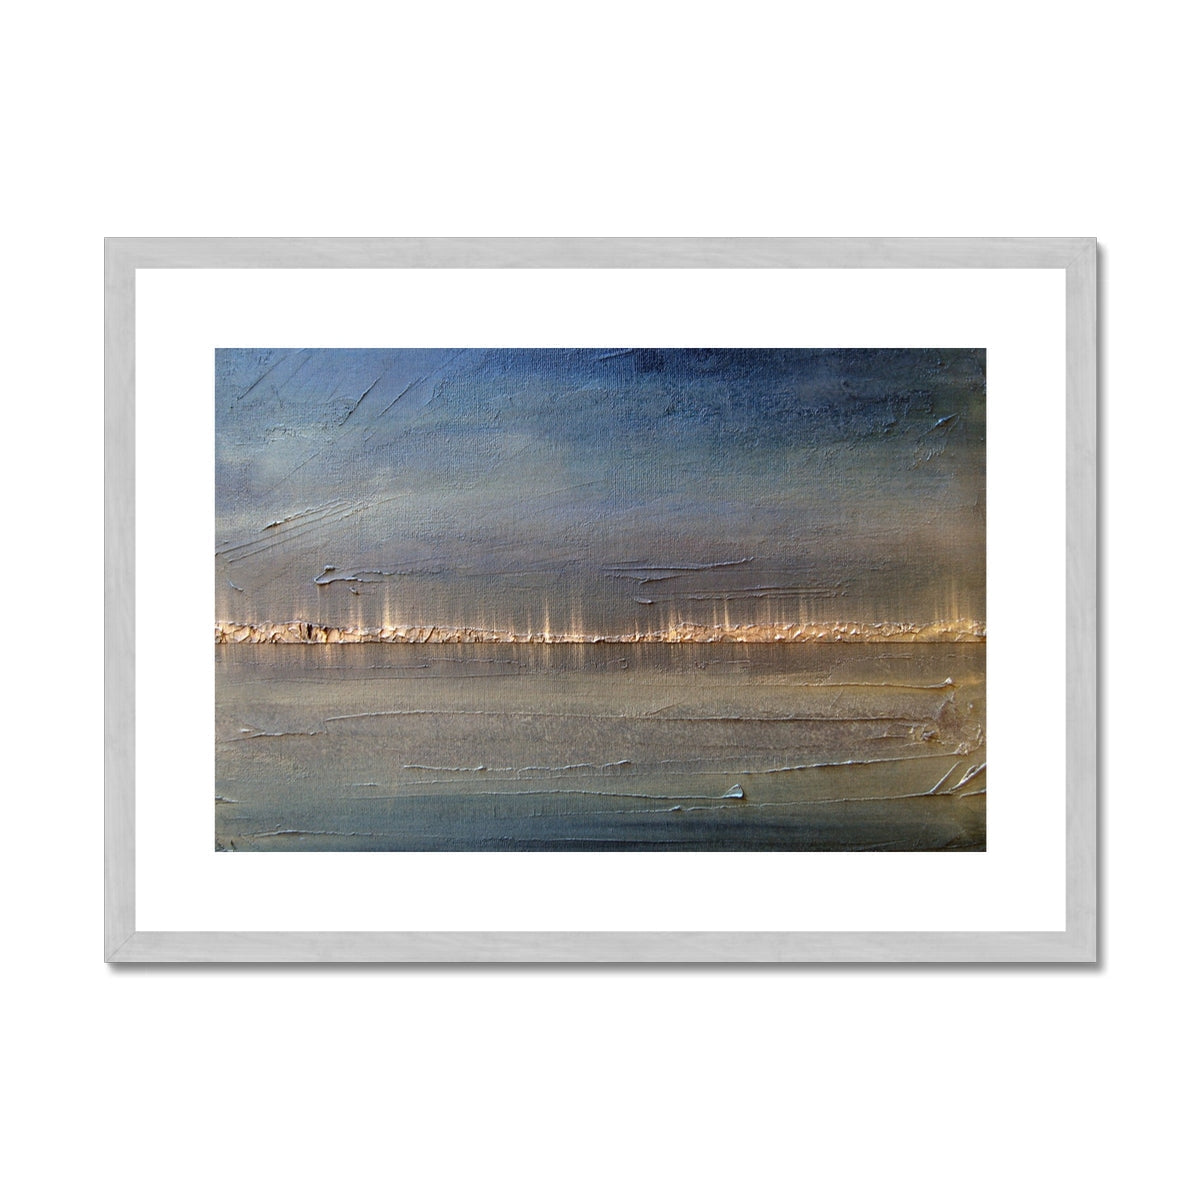 Distant Lights Lake Ontario Painting | Antique Framed & Mounted Prints From Scotland-Antique Framed & Mounted Prints-World Art Gallery-A2 Landscape-Silver Frame-Paintings, Prints, Homeware, Art Gifts From Scotland By Scottish Artist Kevin Hunter